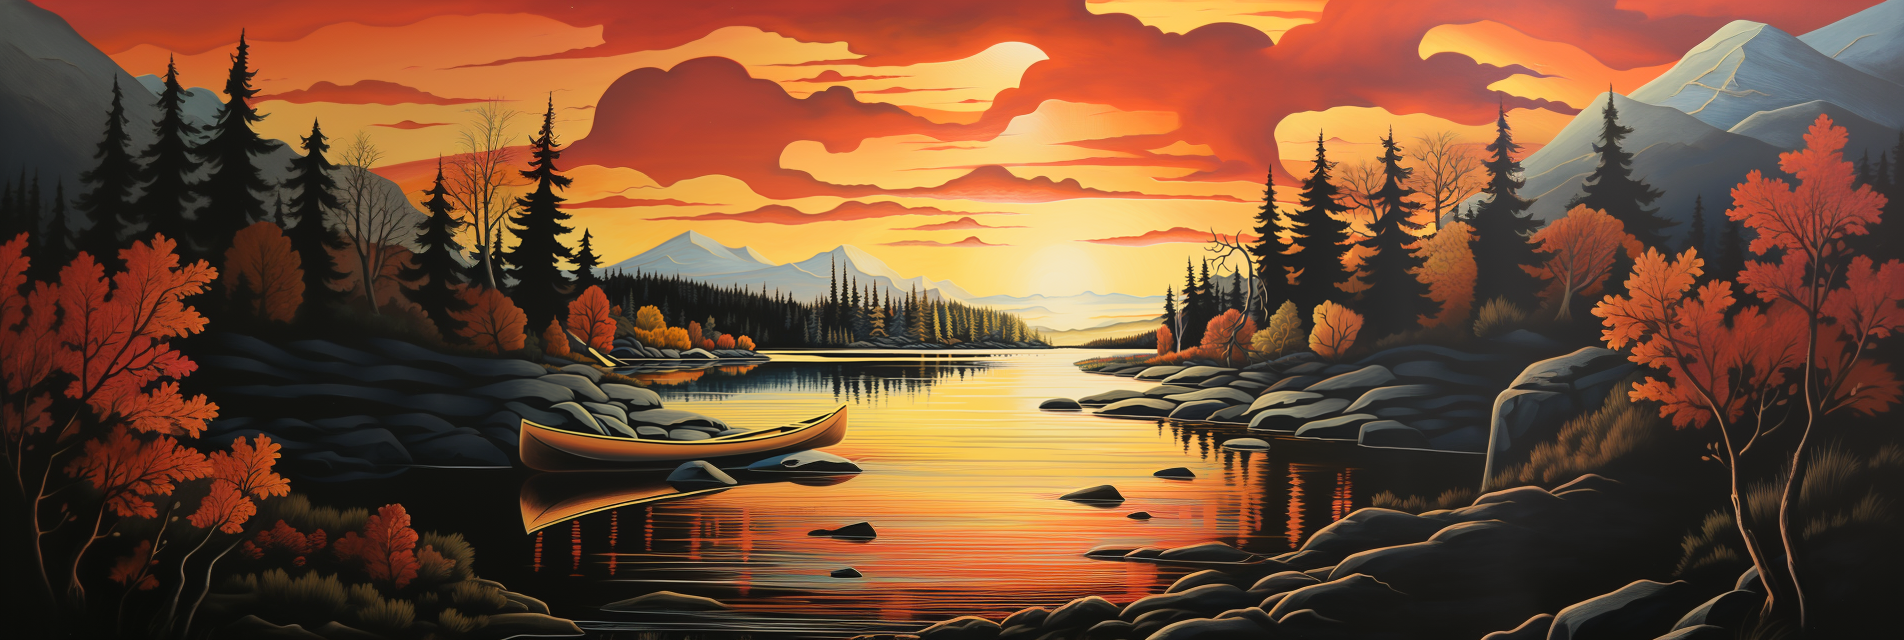 A stylized vista; a lake surrounded by mountains and trees with a sunset in the background and a canoe nestled in the rocks on the shoreline